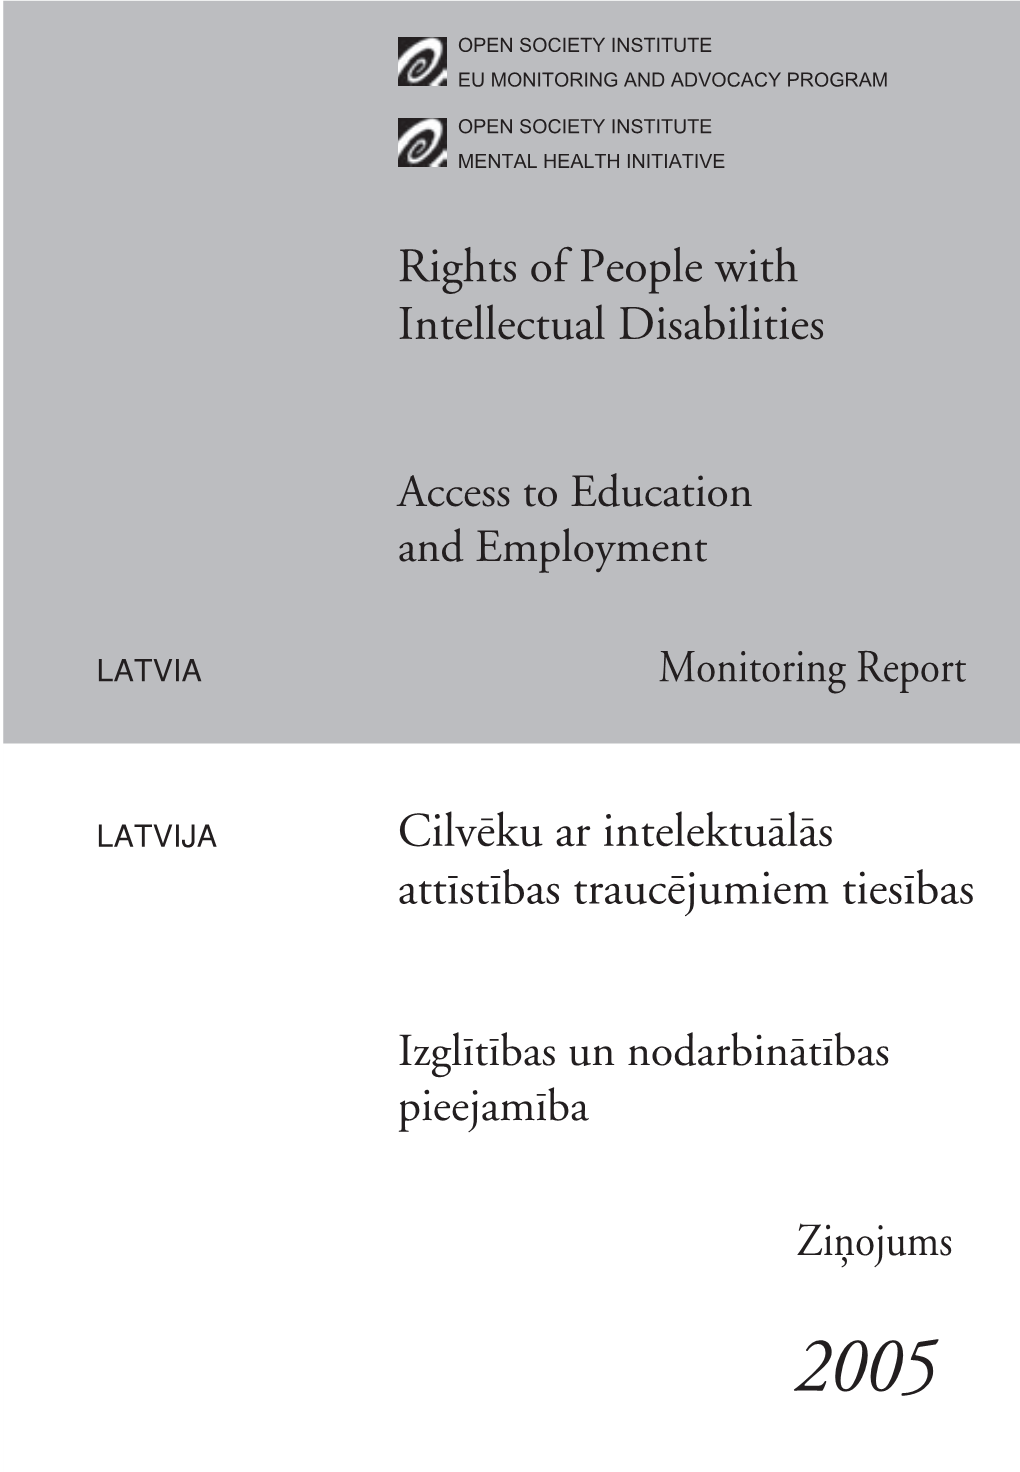 Rights of People with Intellectual Disabilities in Latvia